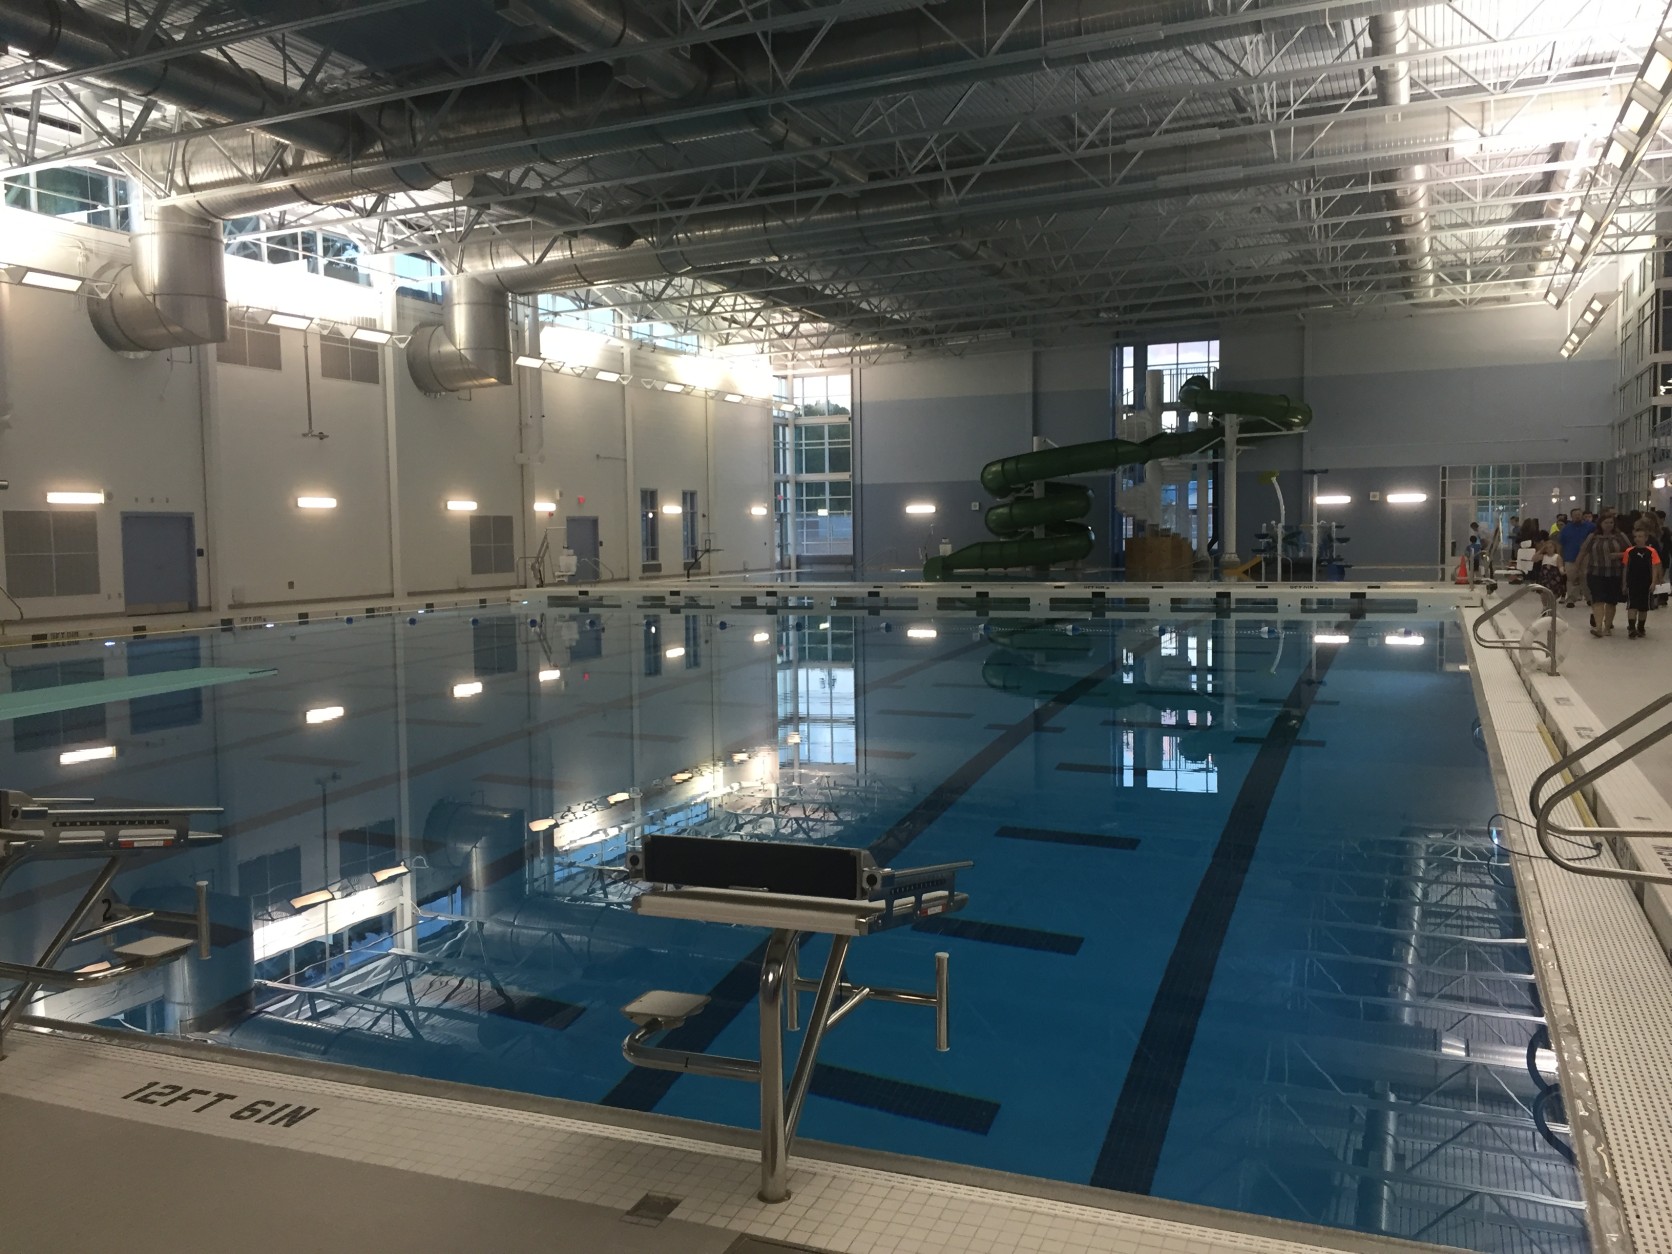 The school which cost $110 million to build can hold 2,200 students and is home to a state of the arts performing art center and a new county-run aquatic center. (Courtesy Colgan High School